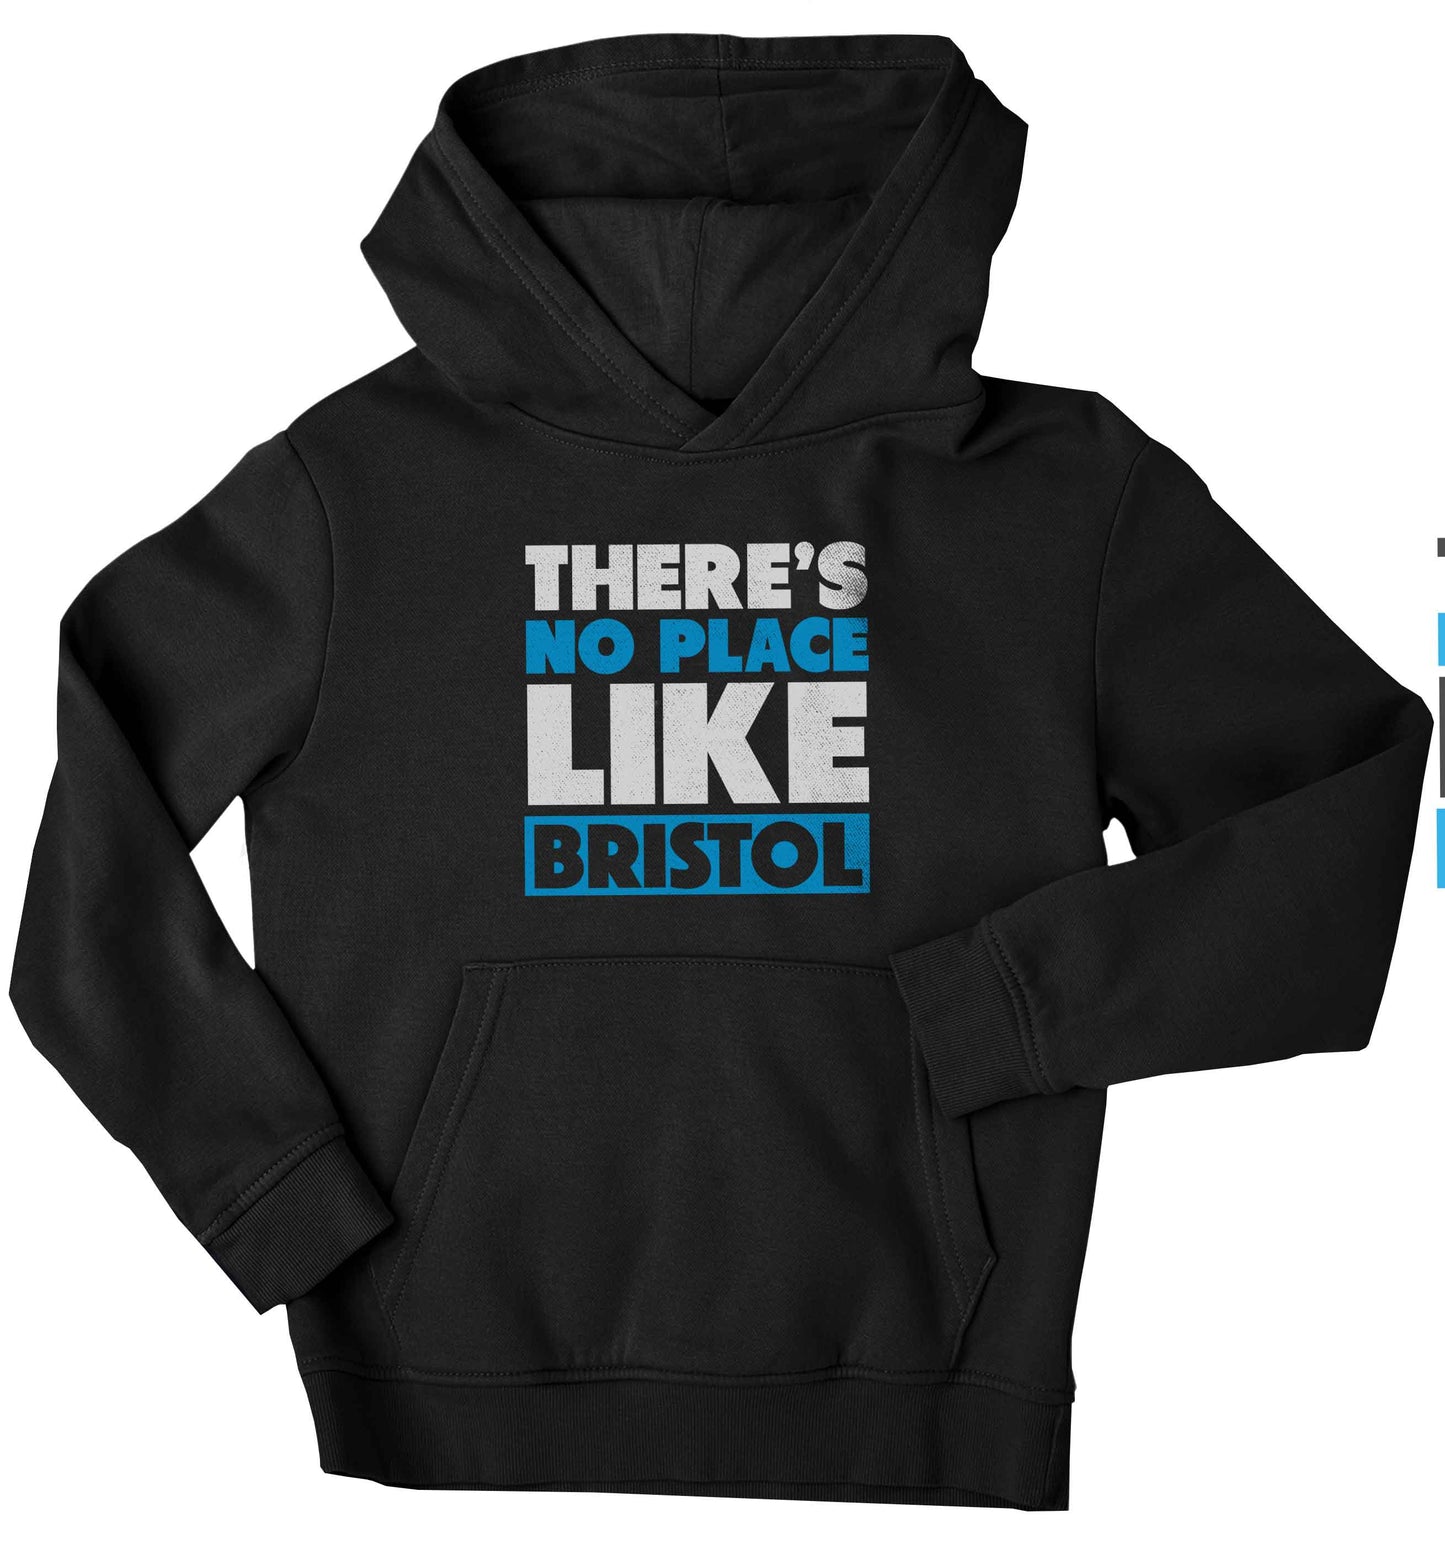 There's no place like Bristol children's black hoodie 12-13 Years